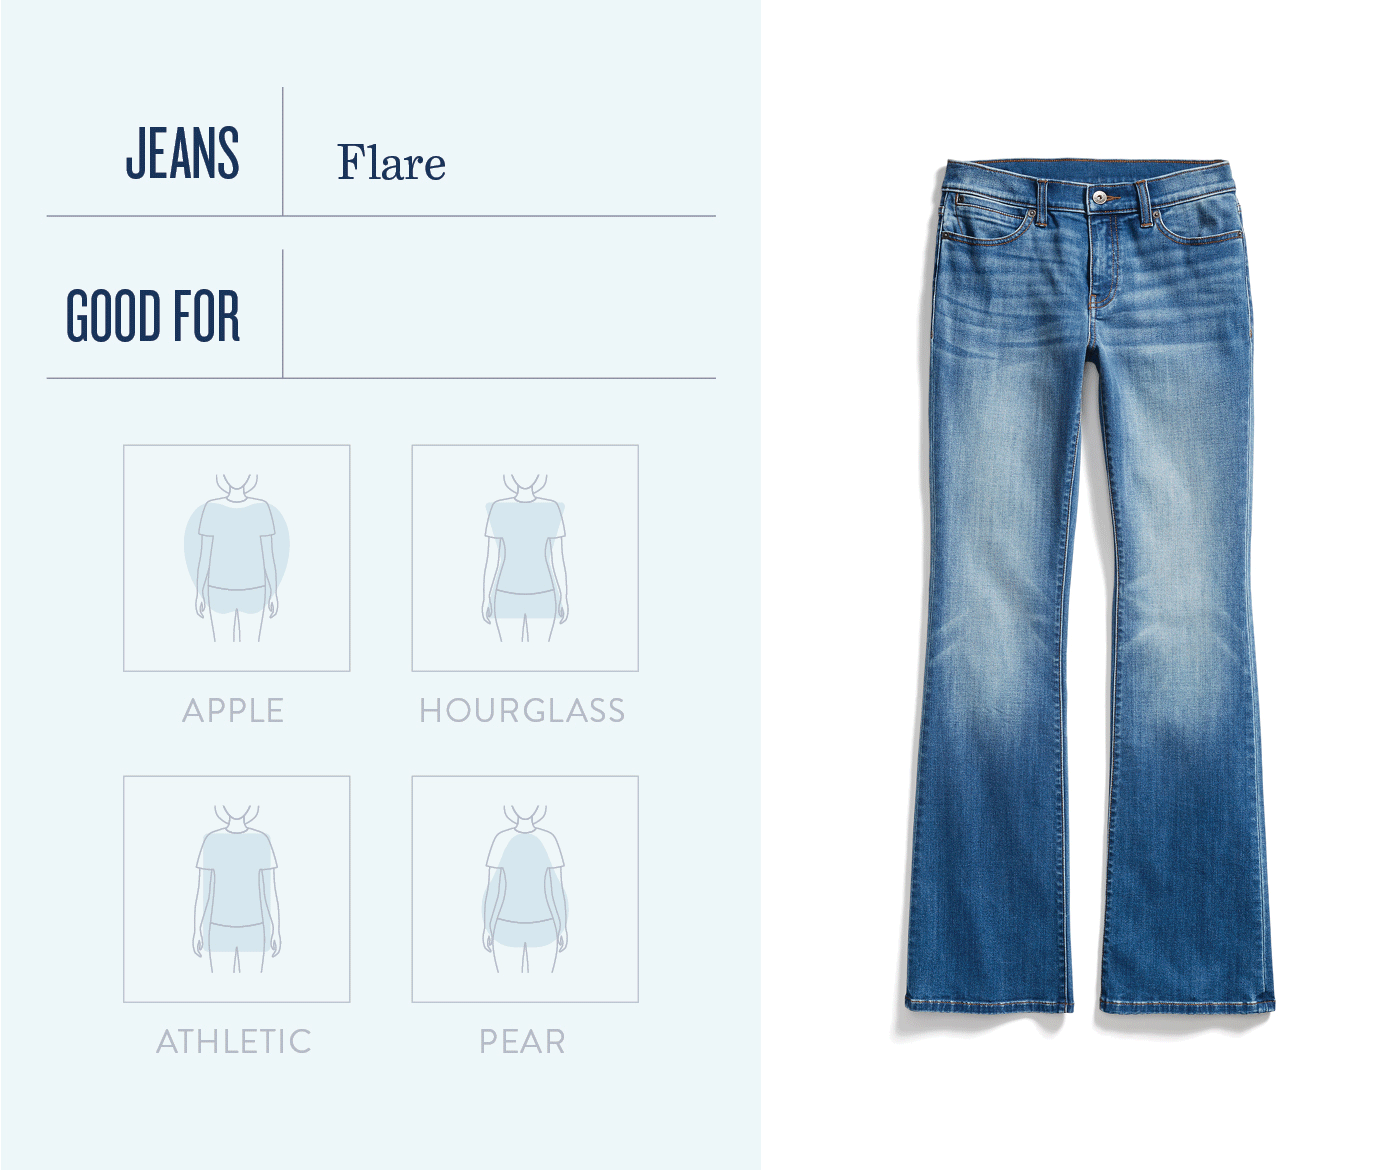 How to Find Perfect Jeans